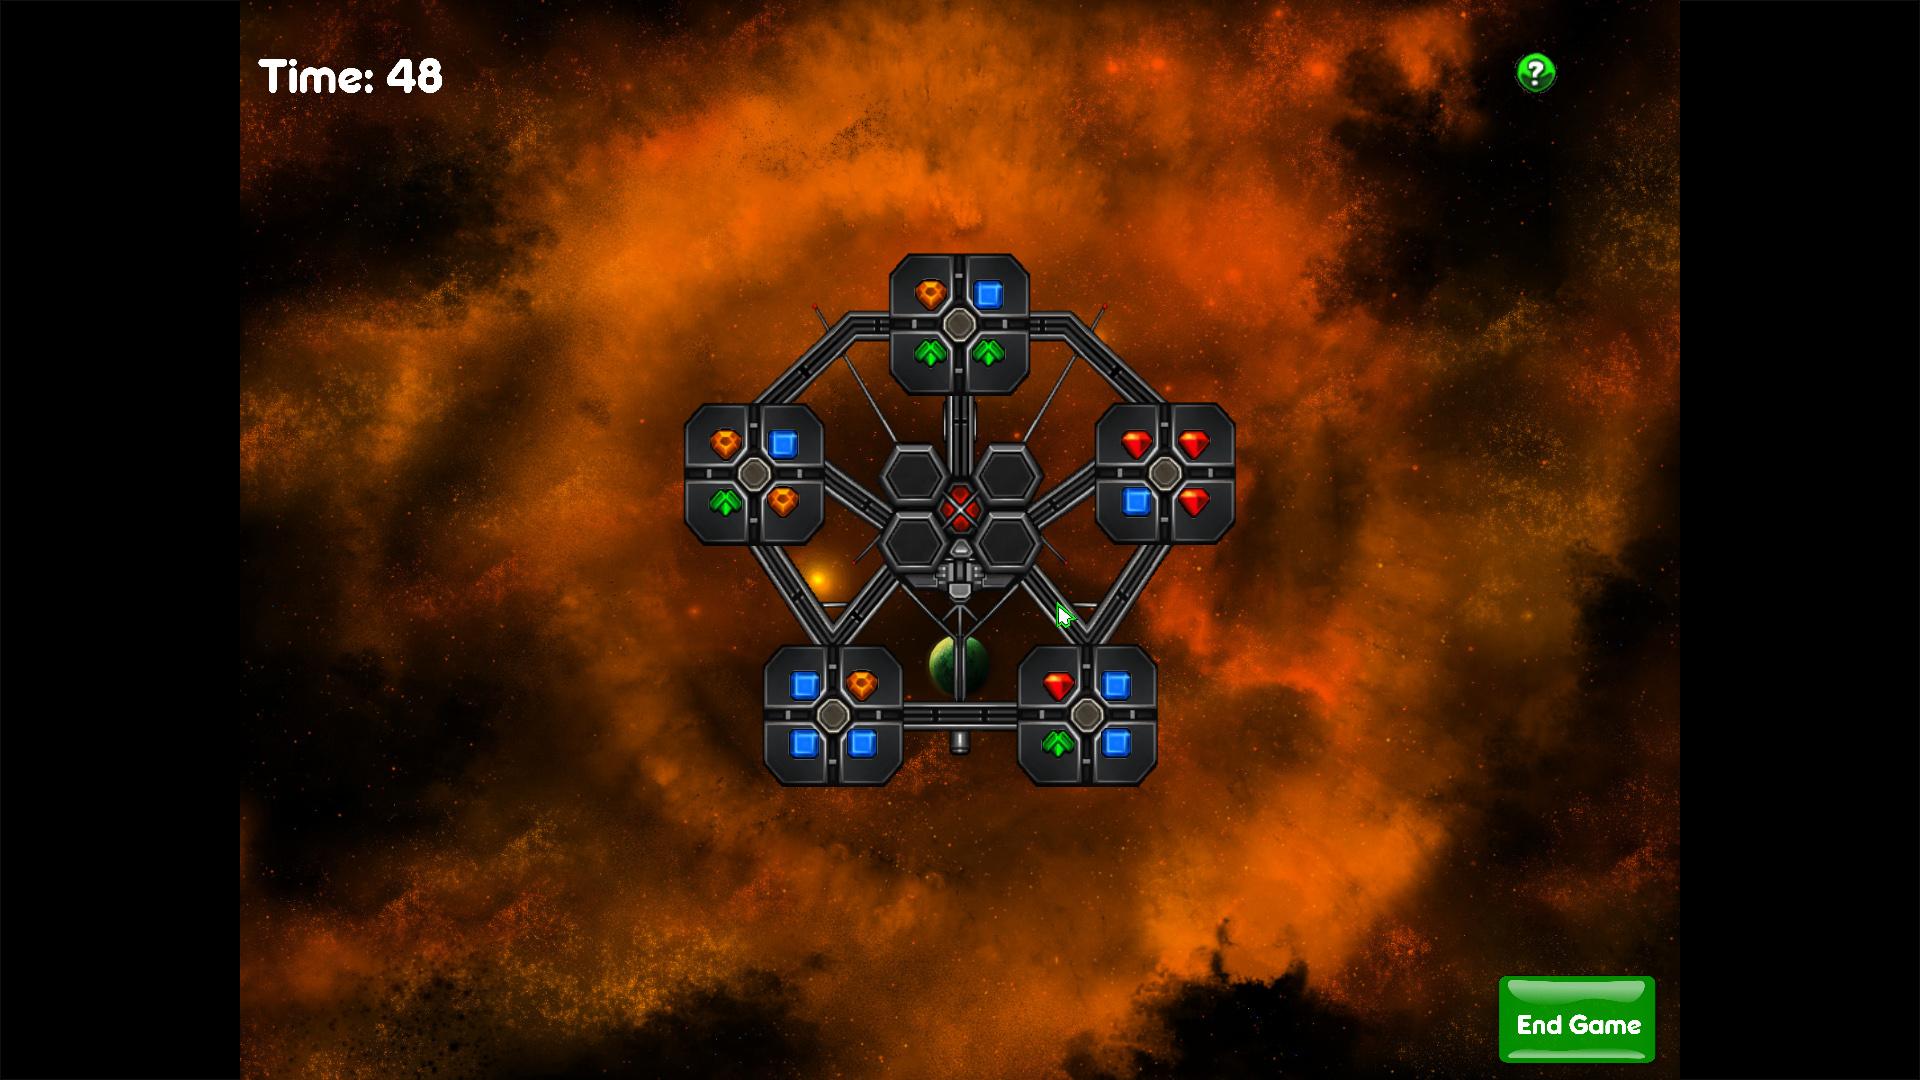 Screenshot №1 from game Puzzle Galaxies